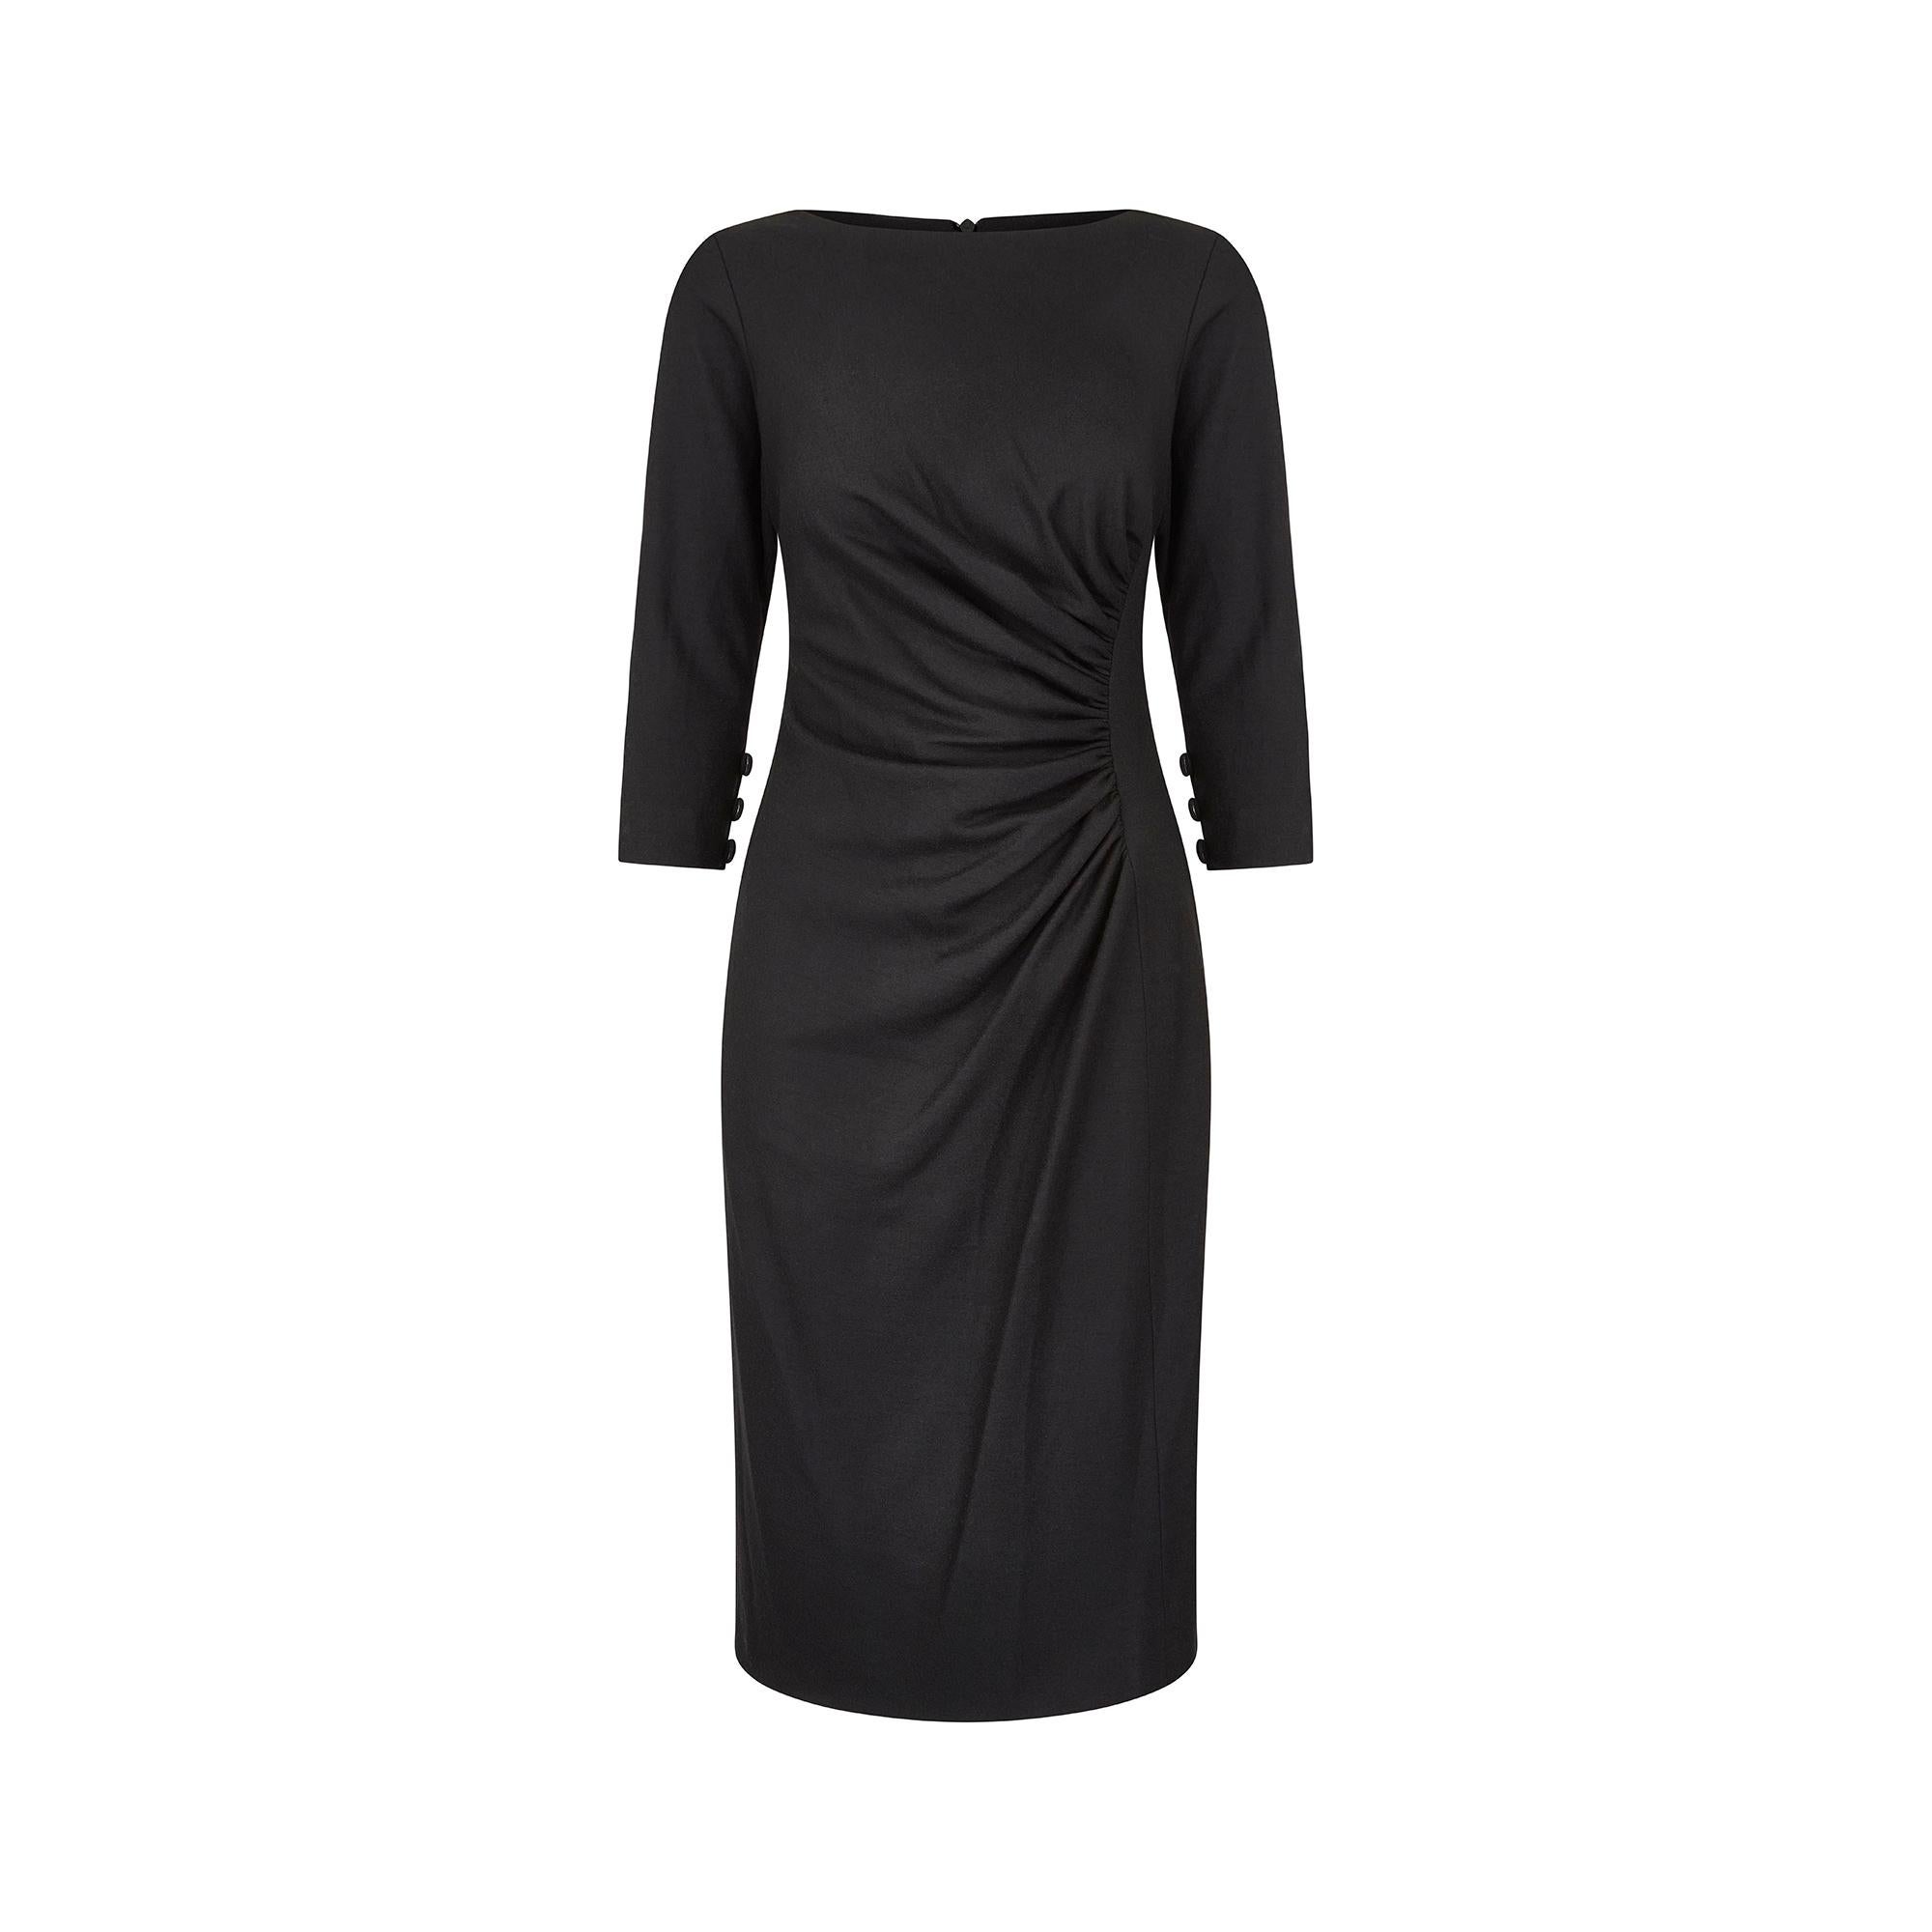 This late 1980s to 1990s minimalist black wool jersey dress is from Y de G, Paris, whose creative director at this time was a former senior member of Yves Saint Laurent's creative team. This is a well executed design with a high, wide neckline and